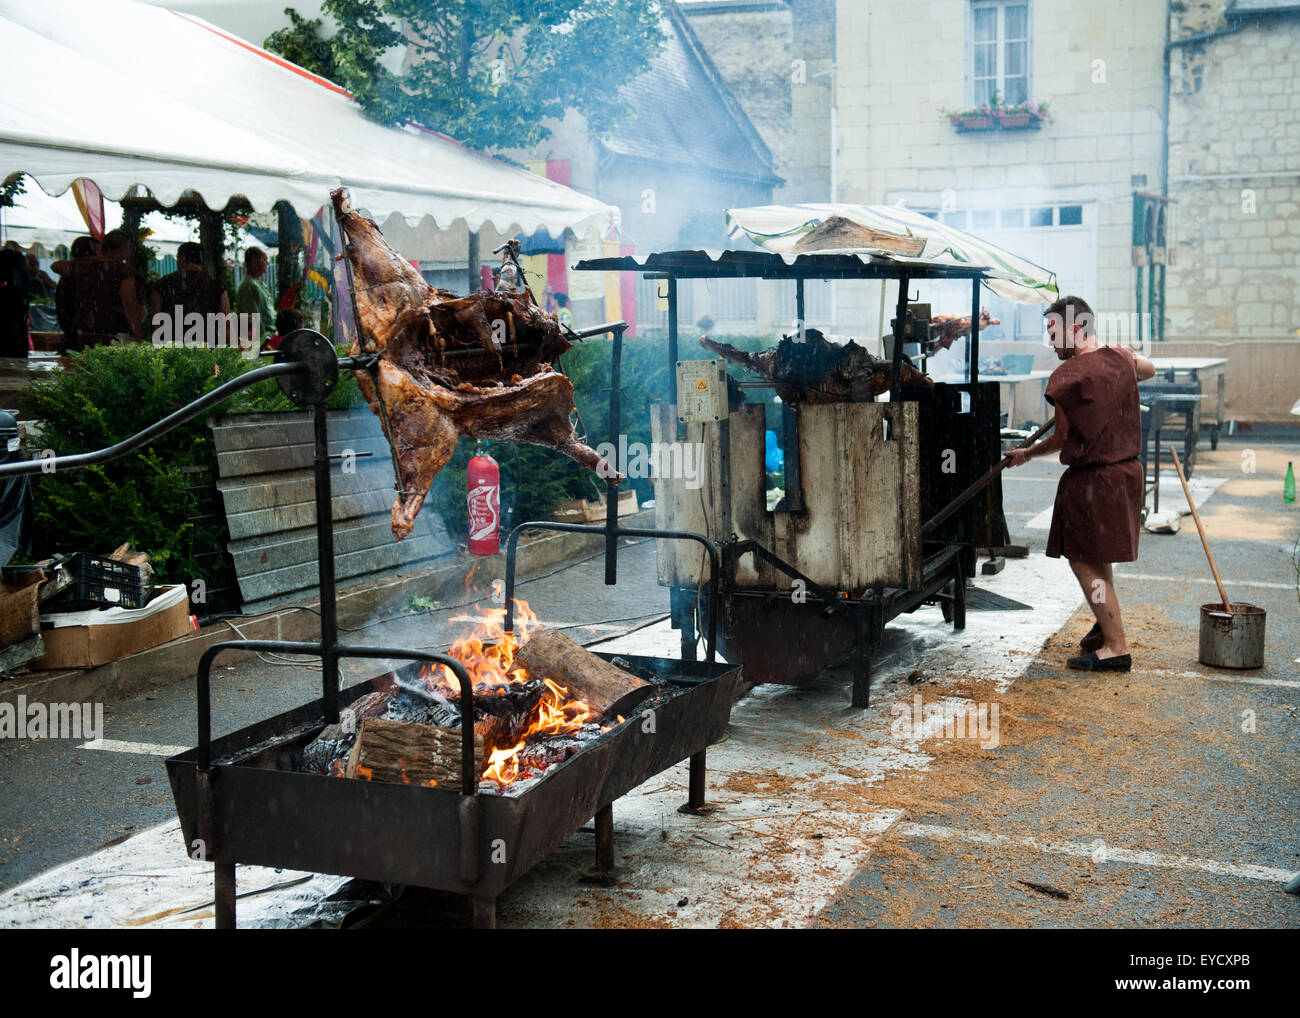 The Medieval Market in Chinon, France - Le Marche' Medieval Stock Photo